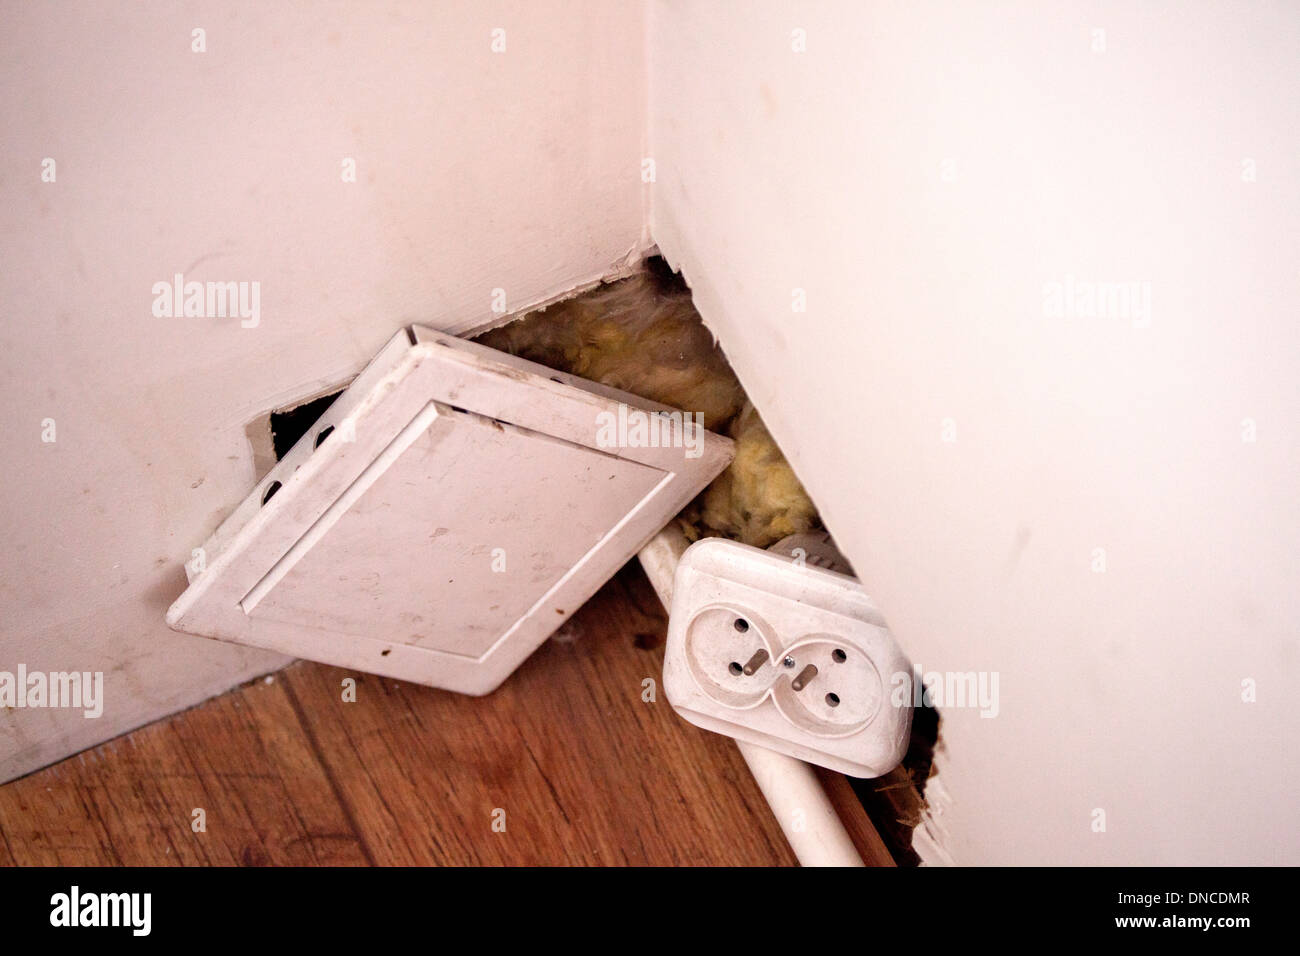 Polish electric socket needing repair hanging out of hole in wall. Lodz Central Poland Stock Photo